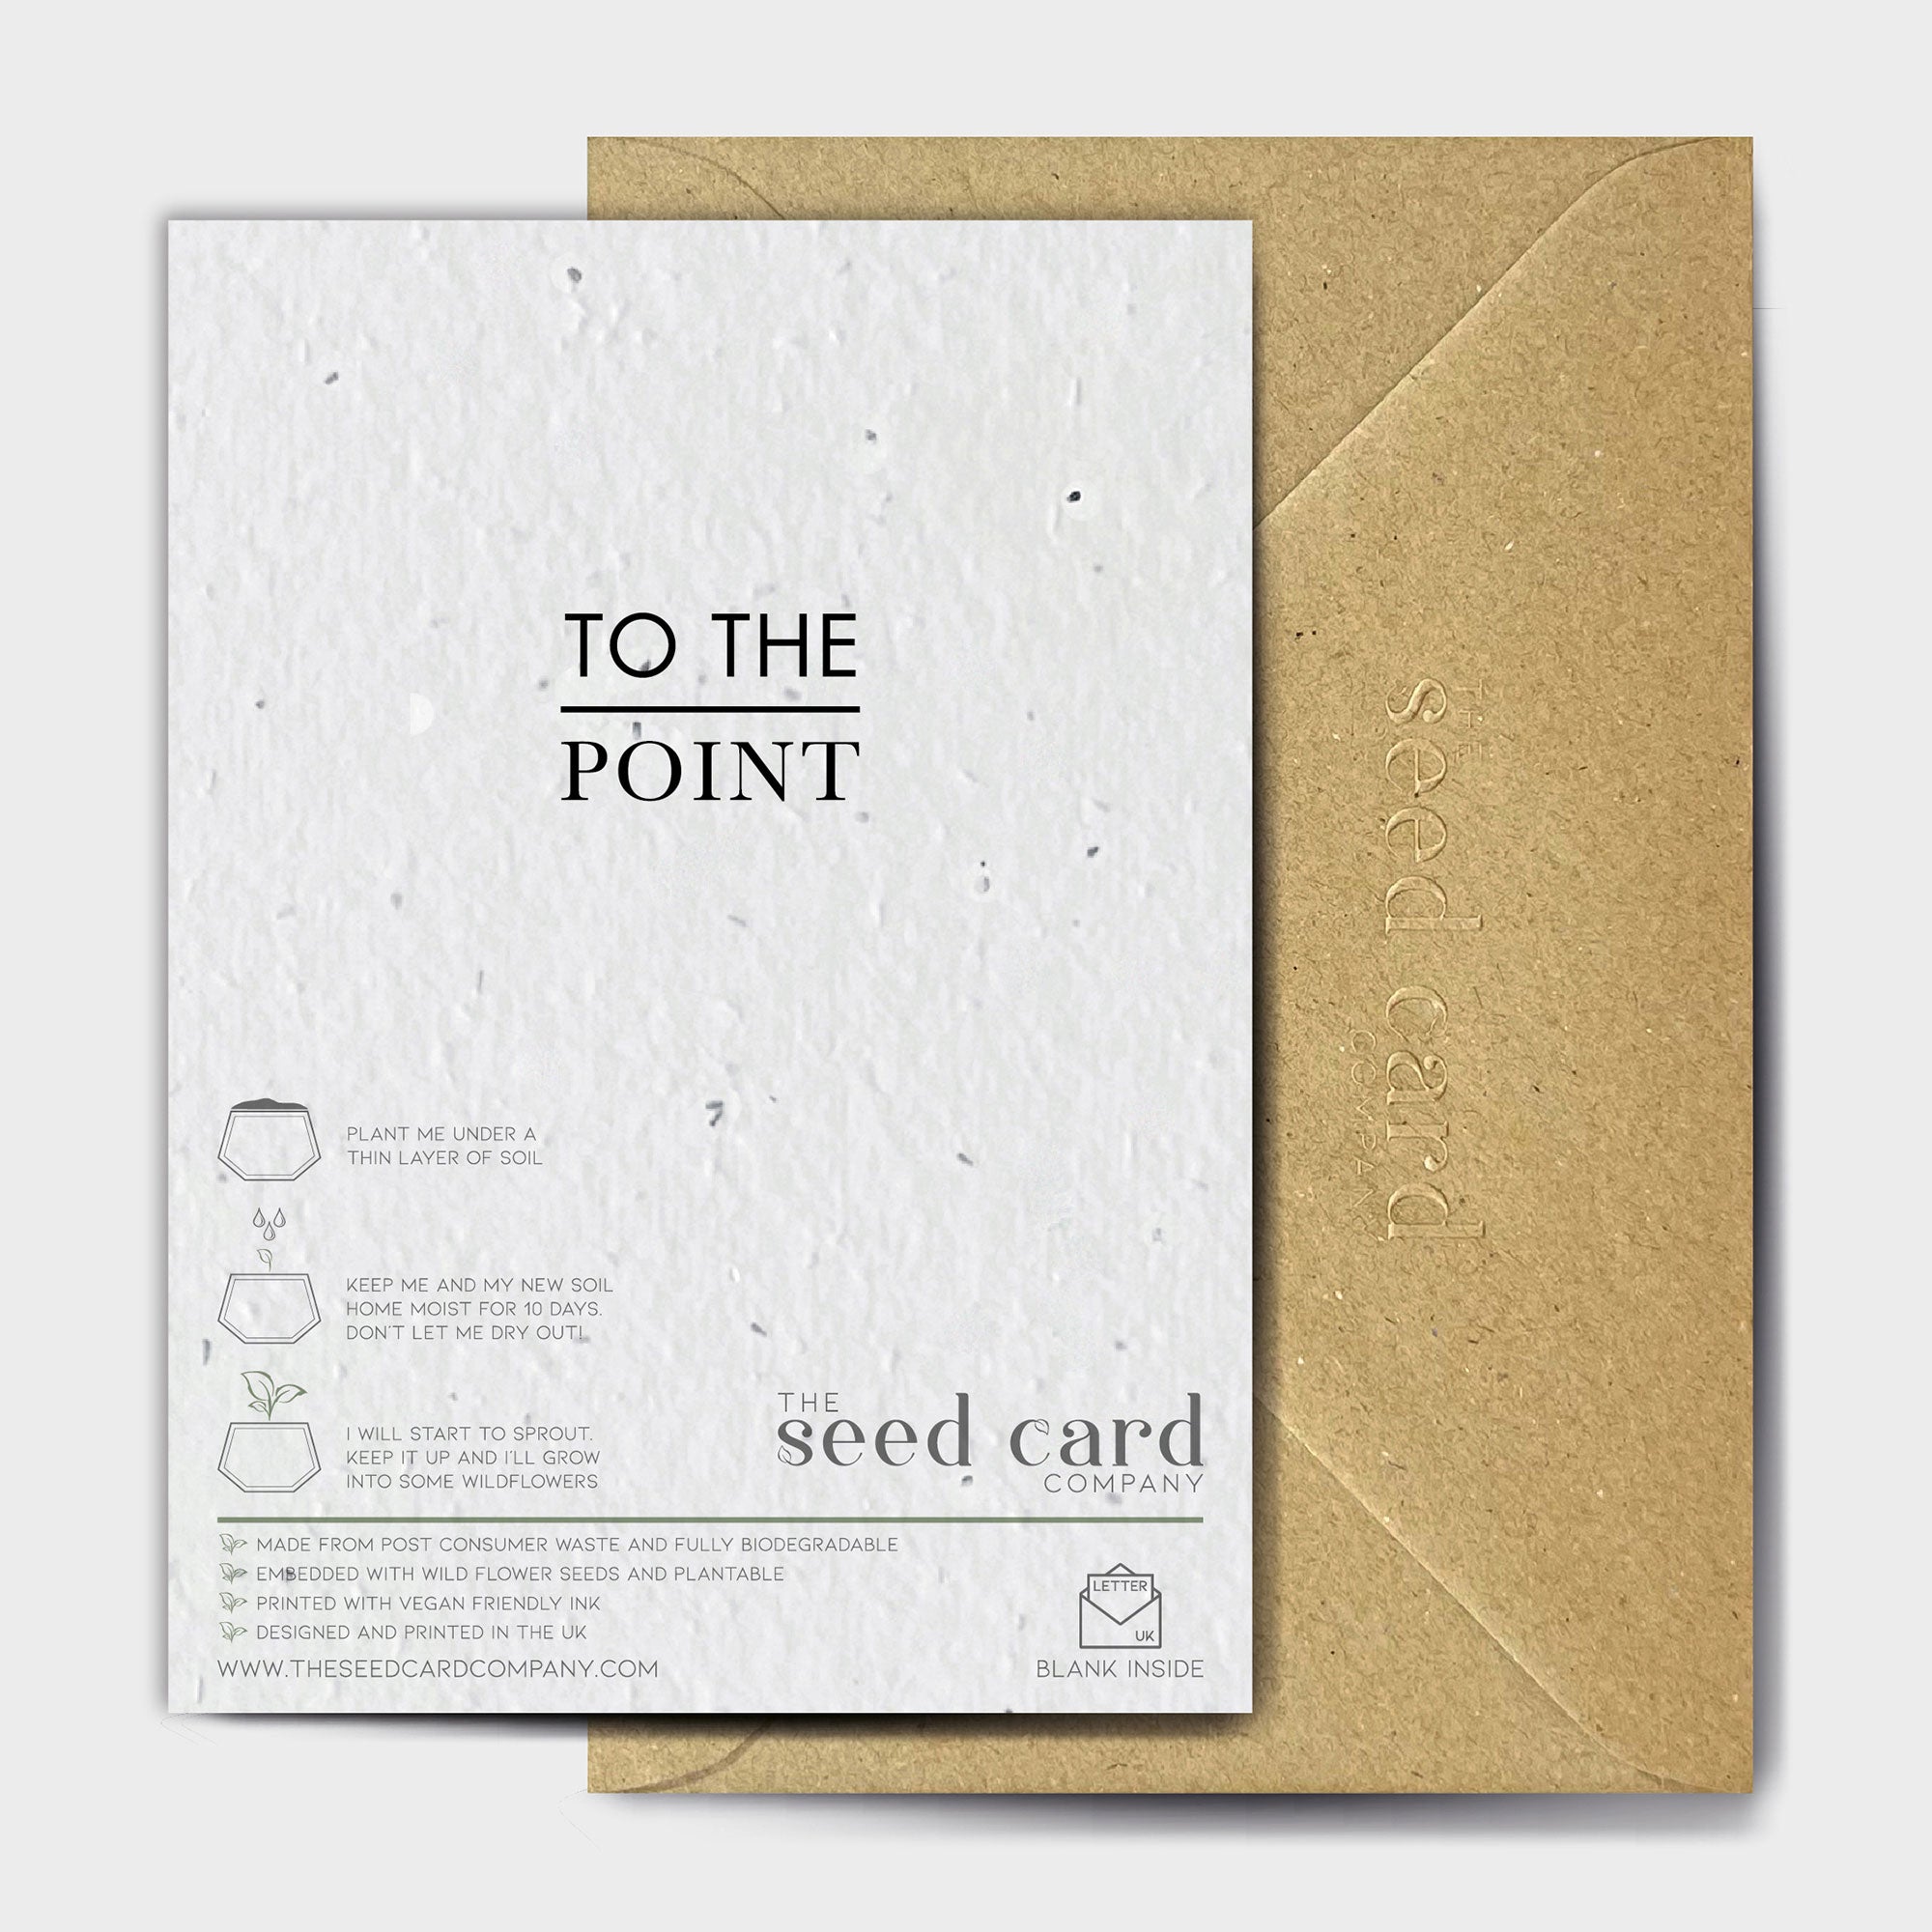 Shop online Ever Seen Something So Accurate? - 100% biodegradable seed-embedded cards Shop -The Seed Card Company